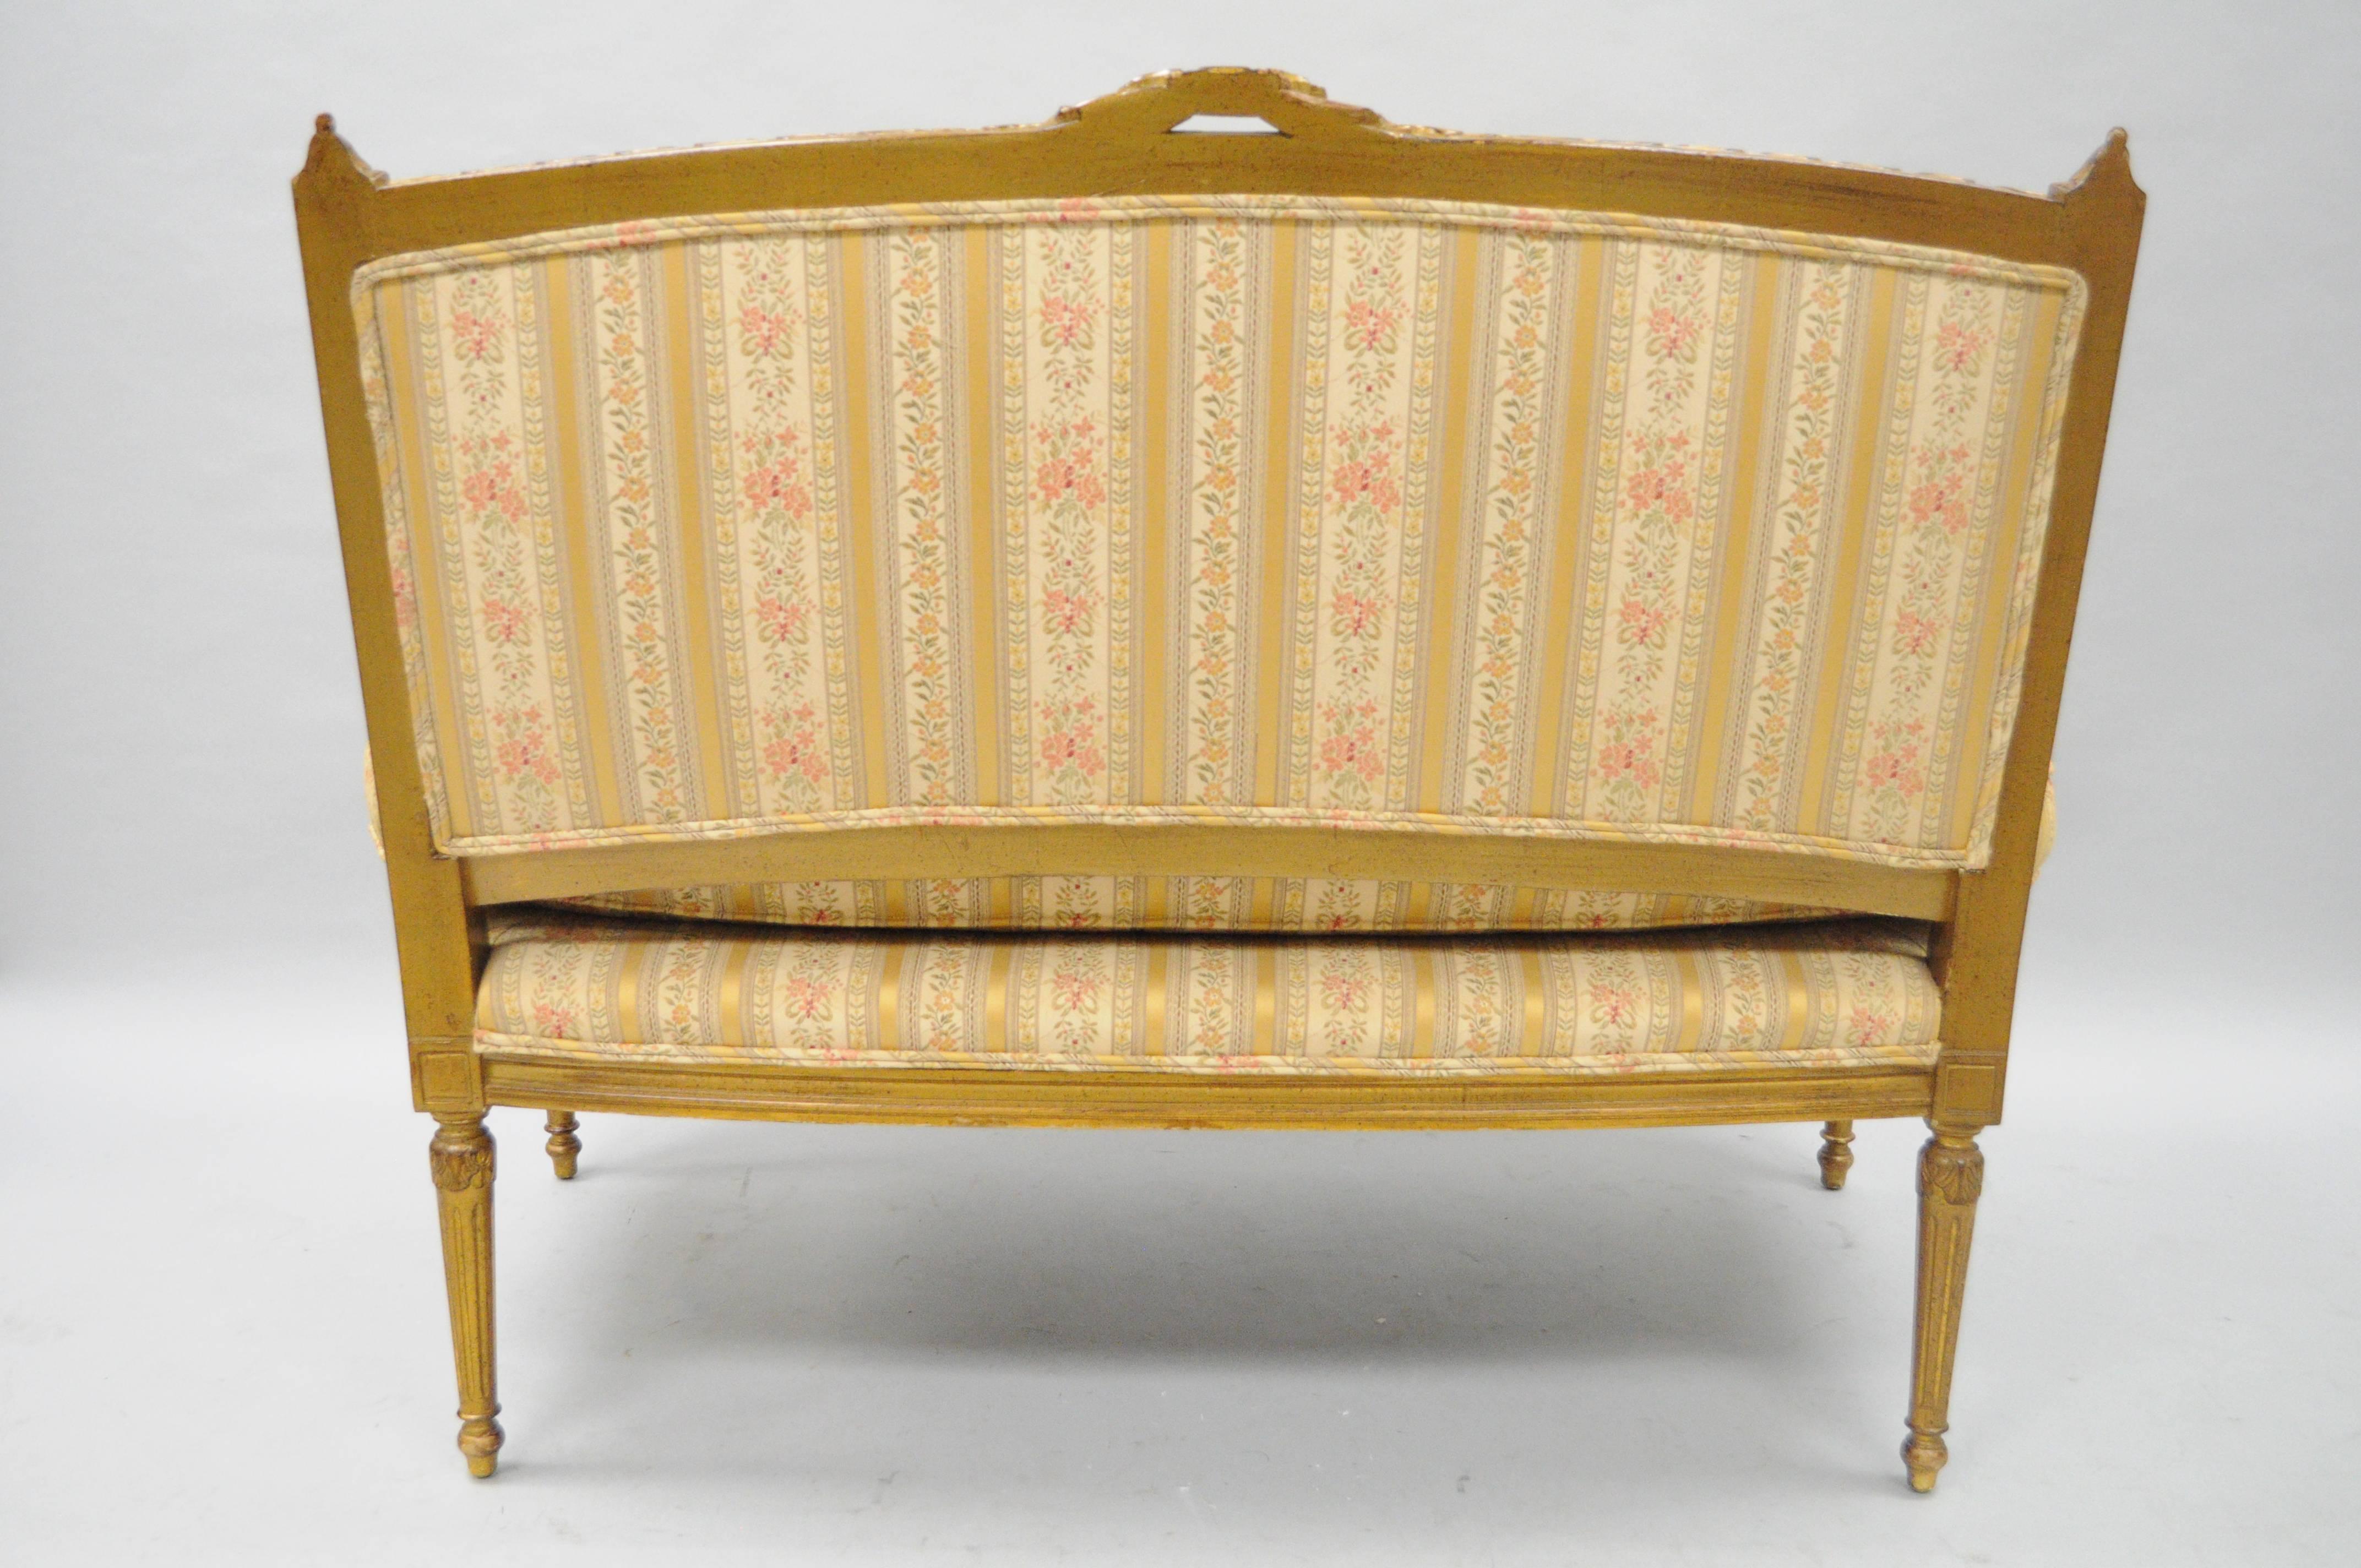 Gold French Louis XVI Directoire Style Settee Loveseat Carved Upholstered Sofa 2